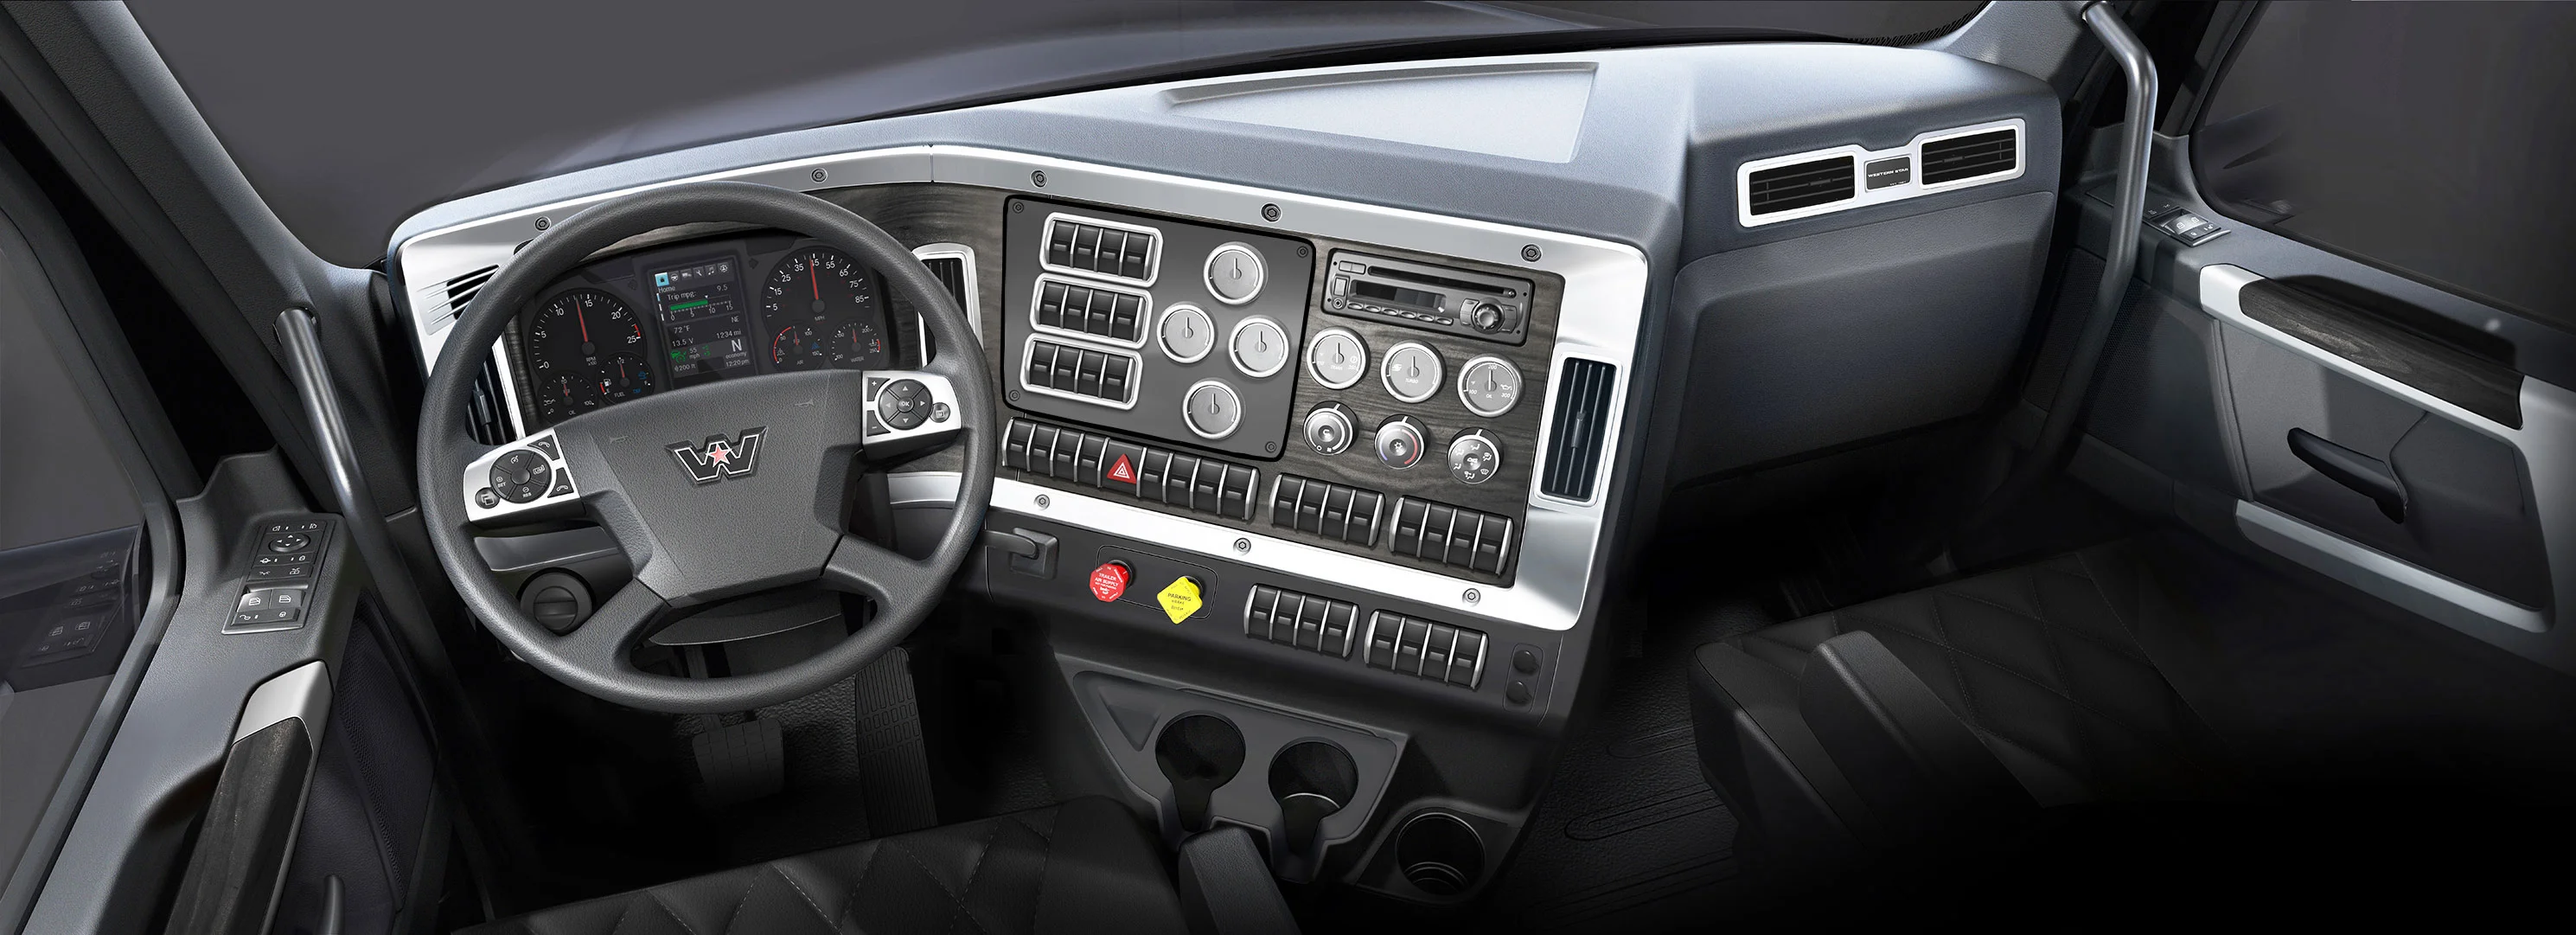 Western Star X Series Interior Dashboard View with Charcoal Black Premium Finish